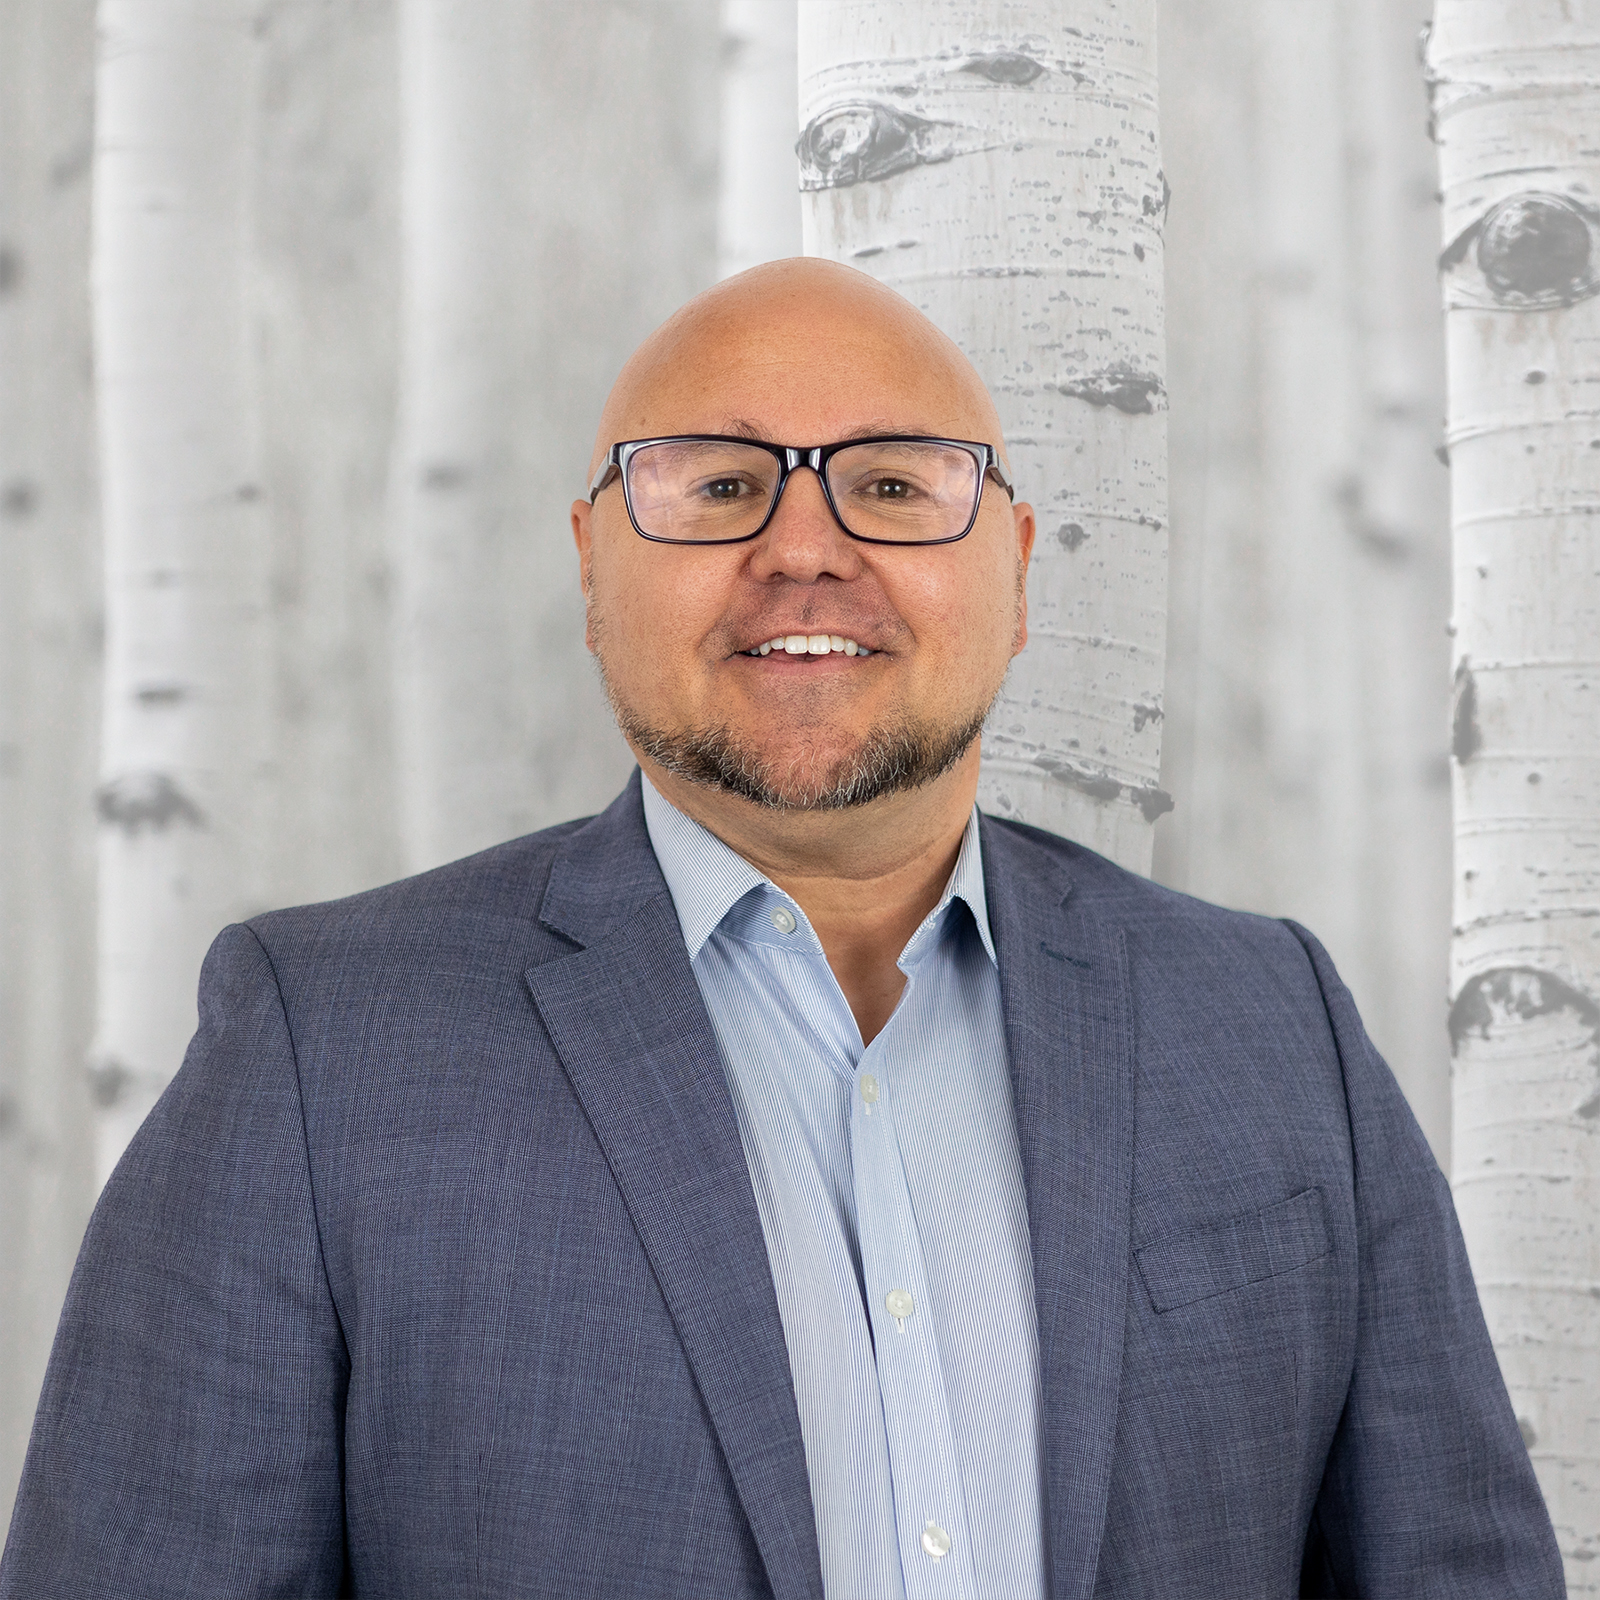 Appointment of Mr. Larry Jenniss as Executive Director of the Wolastoqiyik Wahsipekuk First Nation